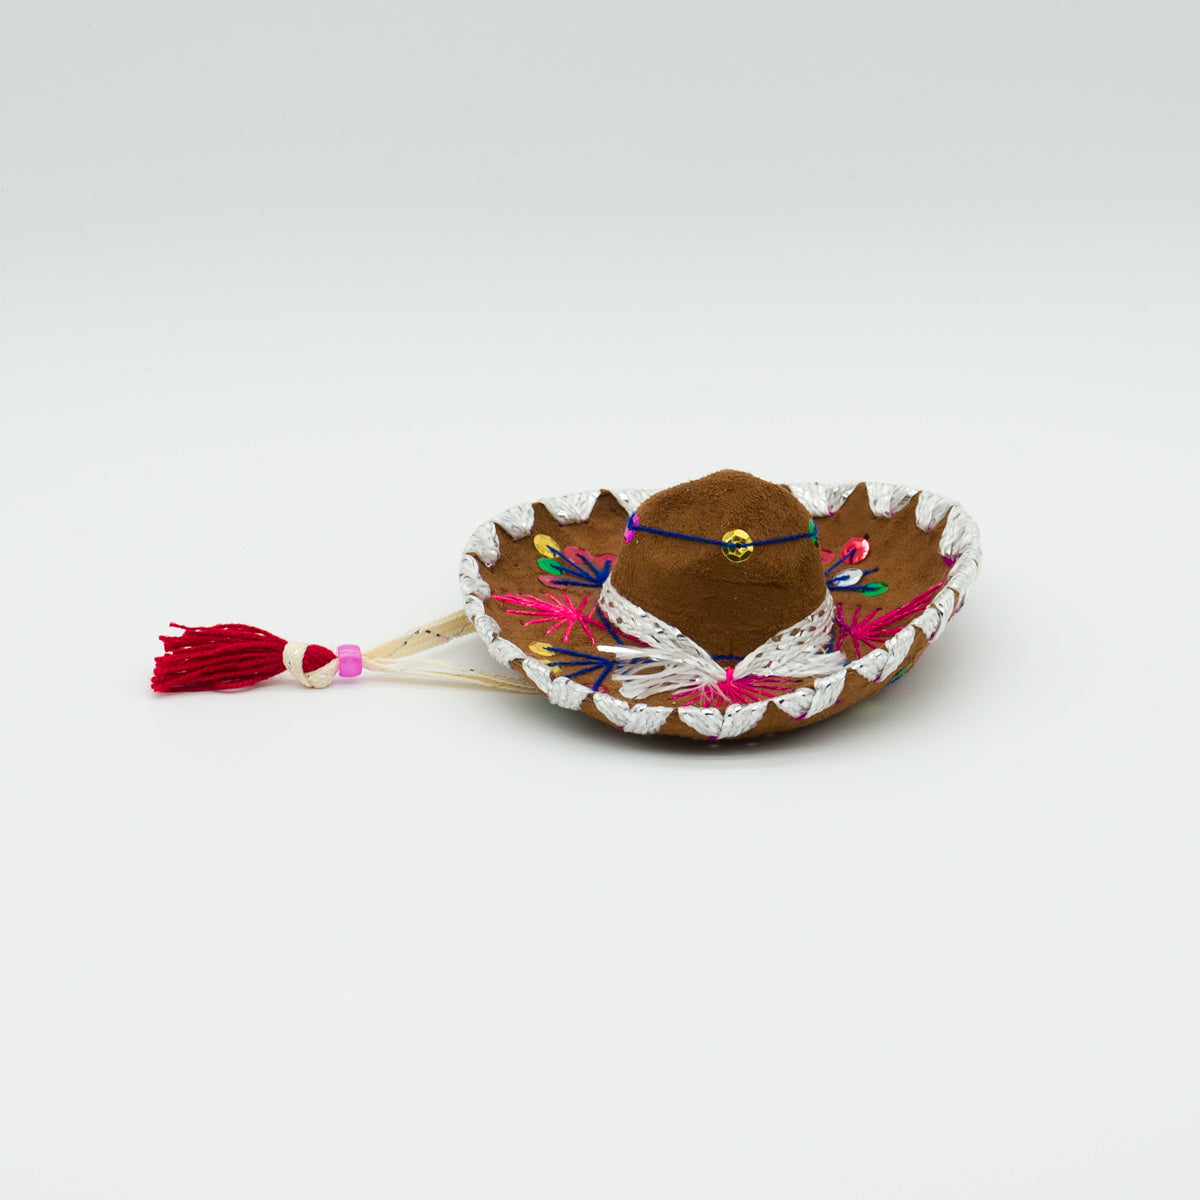 Cute mariachi hat for pets, adding a touch of festivity